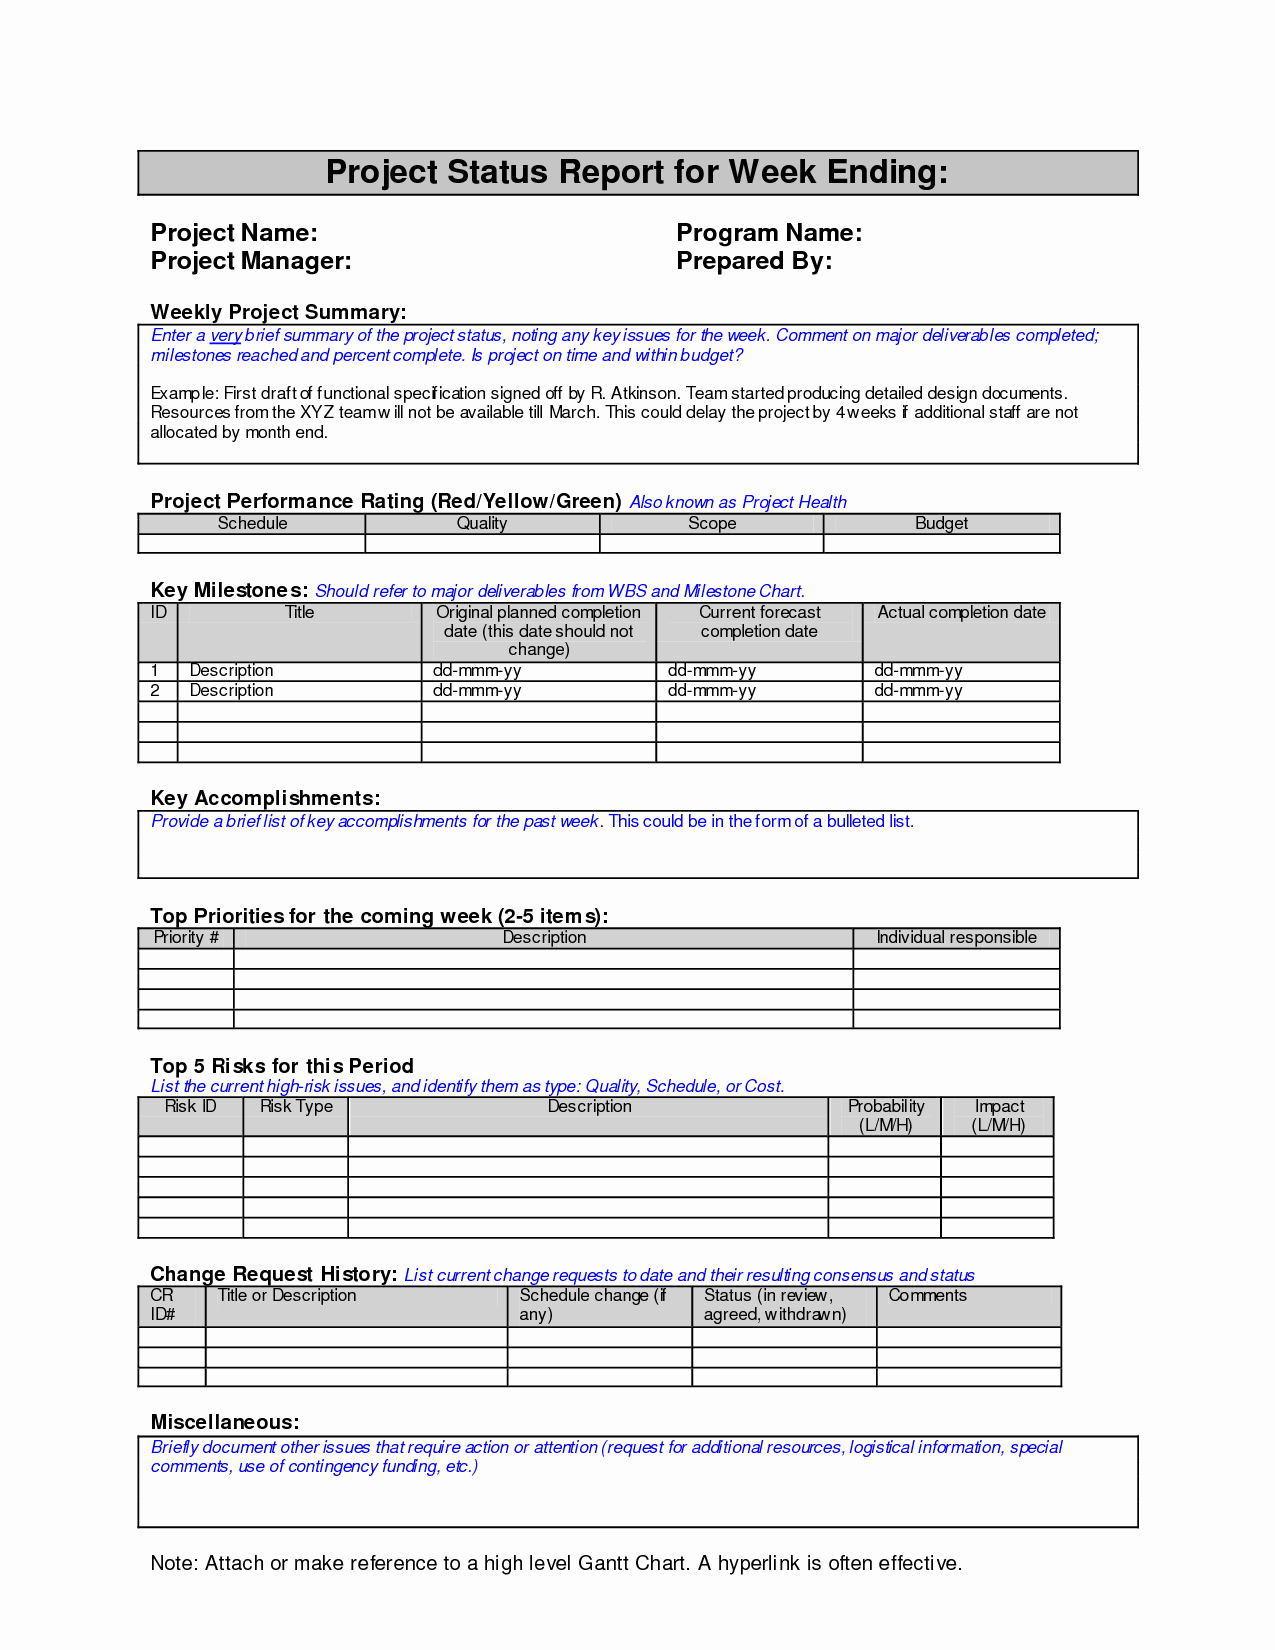 Weekly Status Report Template Excel Inspirational Weekly Project Status Report Sample Google Search